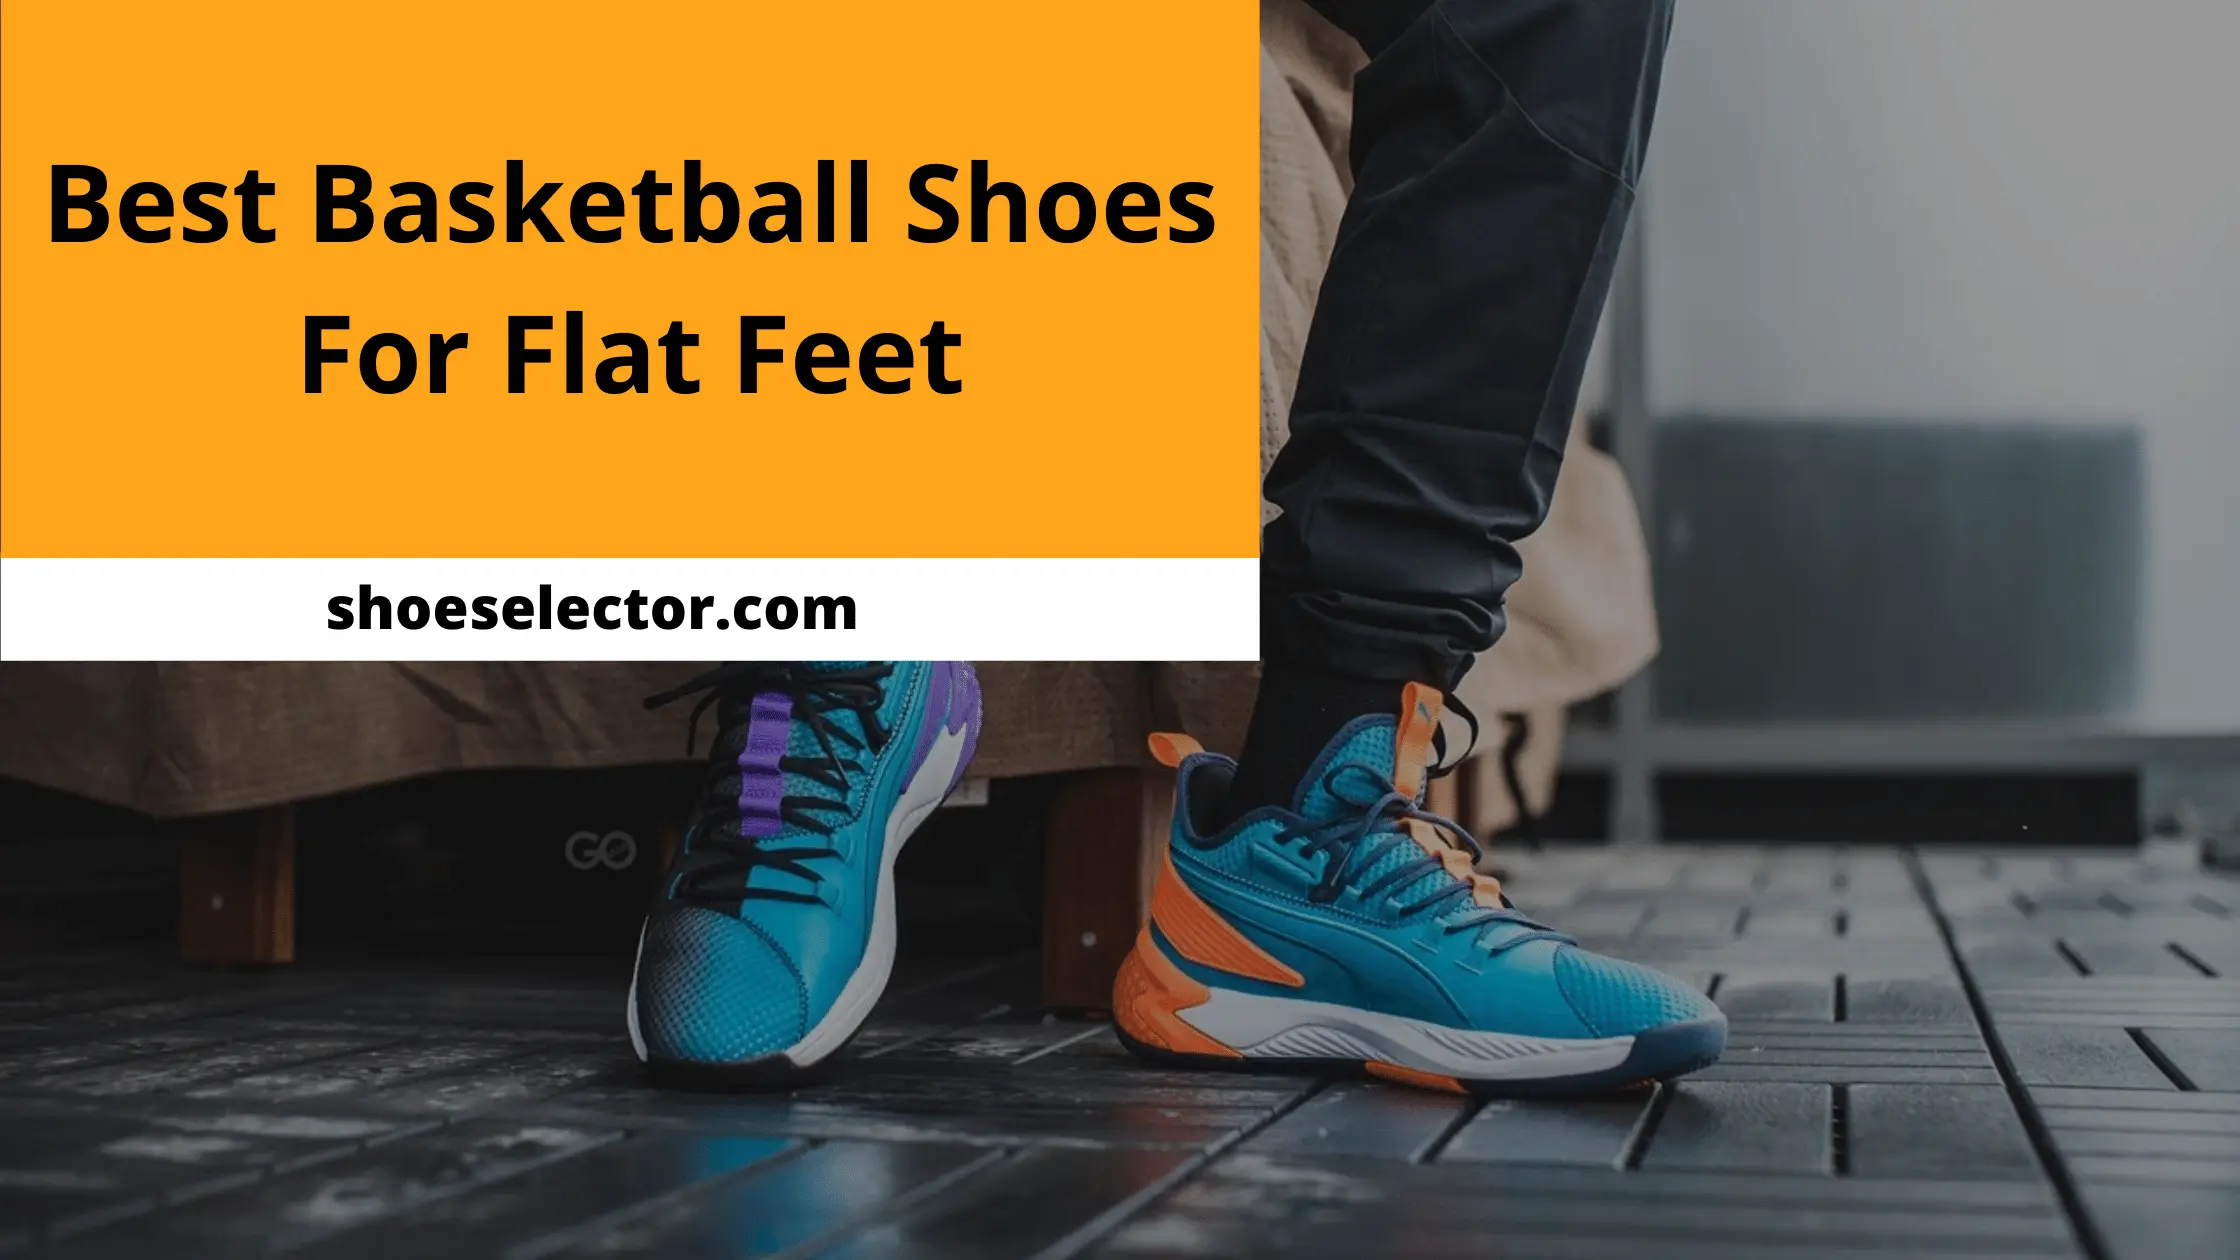 Best Basketball Shoes For Flat Feet - Recommended Guide